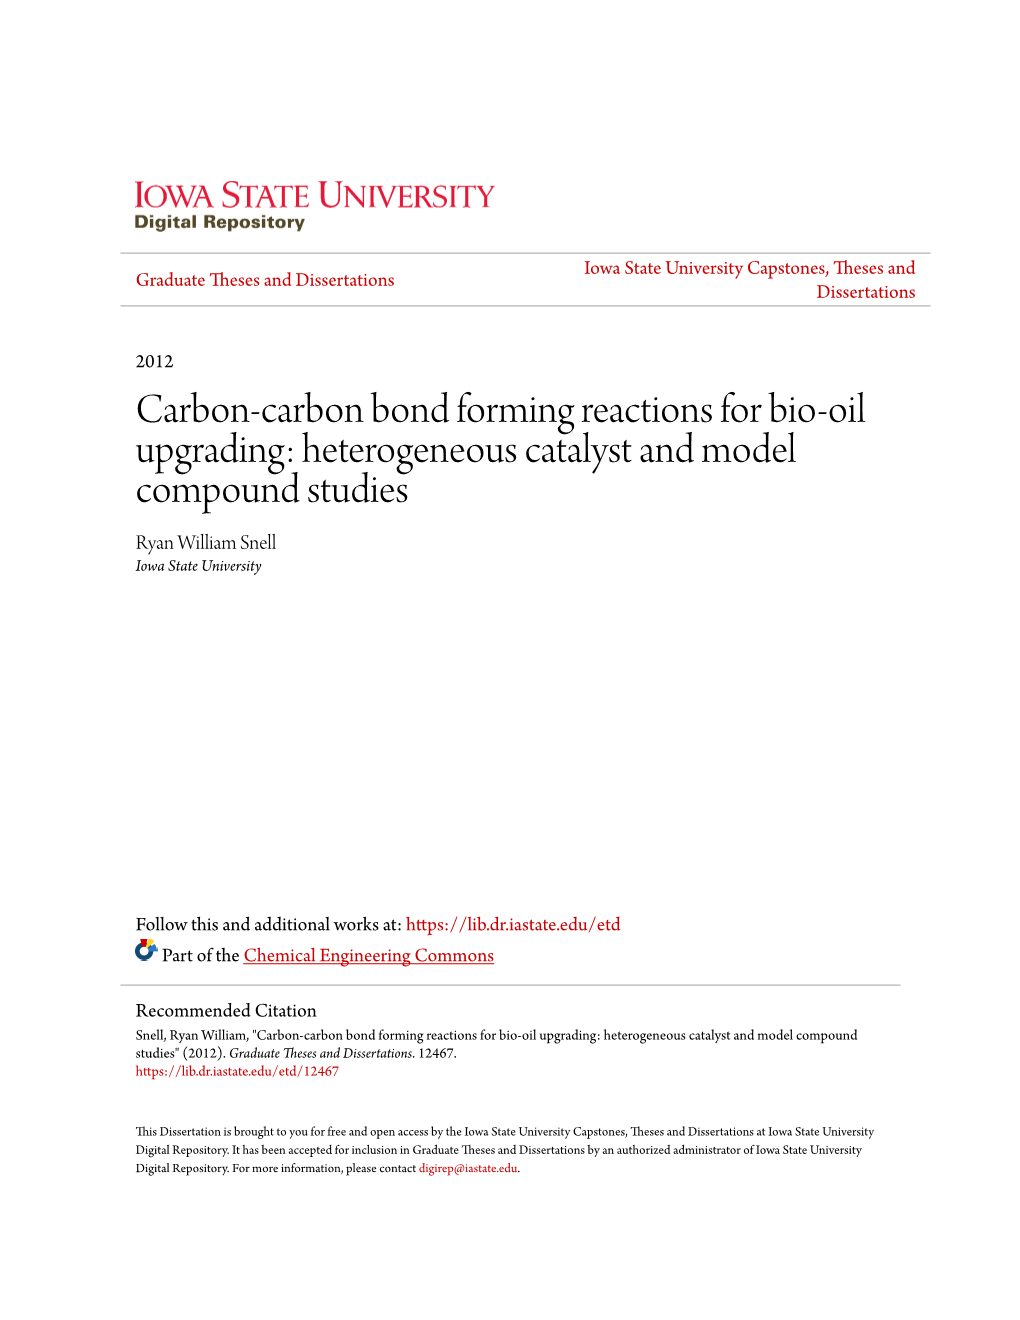 Carbon-Carbon Bond Forming Reactions for Bio-Oil Upgrading: Heterogeneous Catalyst and Model Compound Studies Ryan William Snell Iowa State University